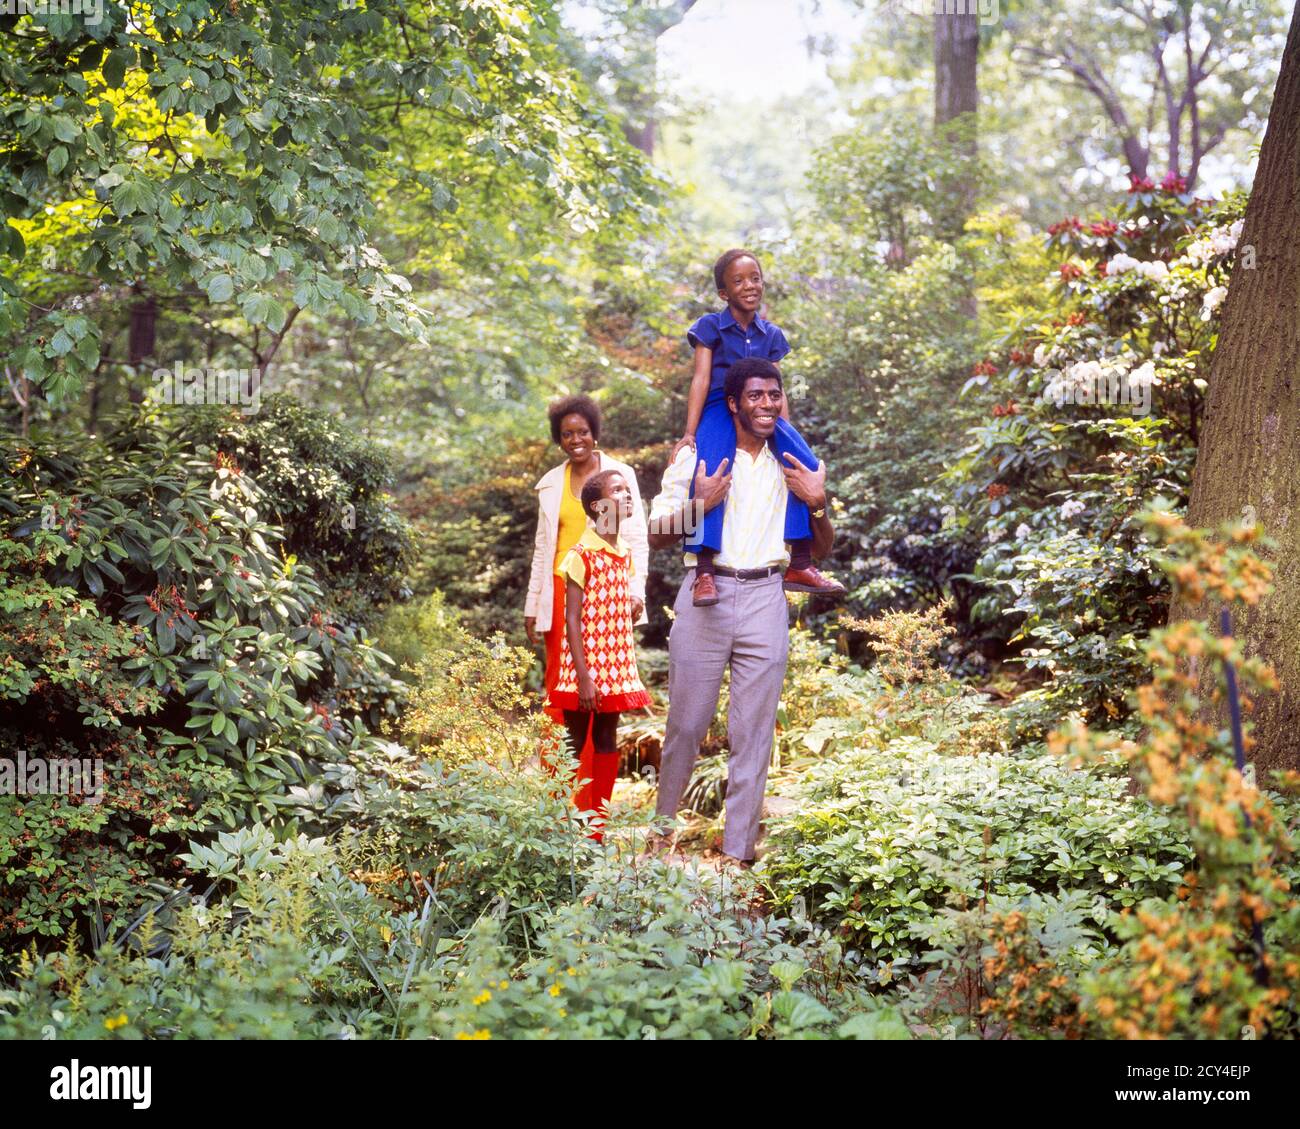 1970s AFRICAN-AMERICAN FAMILY WALKING IN WOODLAND NATURE TRAIL PARK MOTHER FATHER DAUGHTER AND SON RIDING ON DAD’S SHOULDERS - kj5232 PHT001 HARS PAIR 4 SUBURBAN COLOR MOTHERS OLD TIME NOSTALGIA BROTHER OLD FASHION SISTER 1 JUVENILE STYLE SONS FAMILIES JOY LIFESTYLE SATISFACTION FEMALES BROTHERS RURAL HEALTHINESS NATURE COPY SPACE FRIENDSHIP FULL-LENGTH LADIES DAUGHTERS PERSONS INSPIRATION MALES SIBLINGS SISTERS FATHERS SUMMERTIME HAPPINESS WELLNESS ADVENTURE AFRICAN-AMERICANS AFRICAN-AMERICAN AND DADS LOW ANGLE RECREATION BLACK ETHNICITY PRIDE SIBLING CONNECTION JUVENILES MOMS RELAXATION Stock Photo